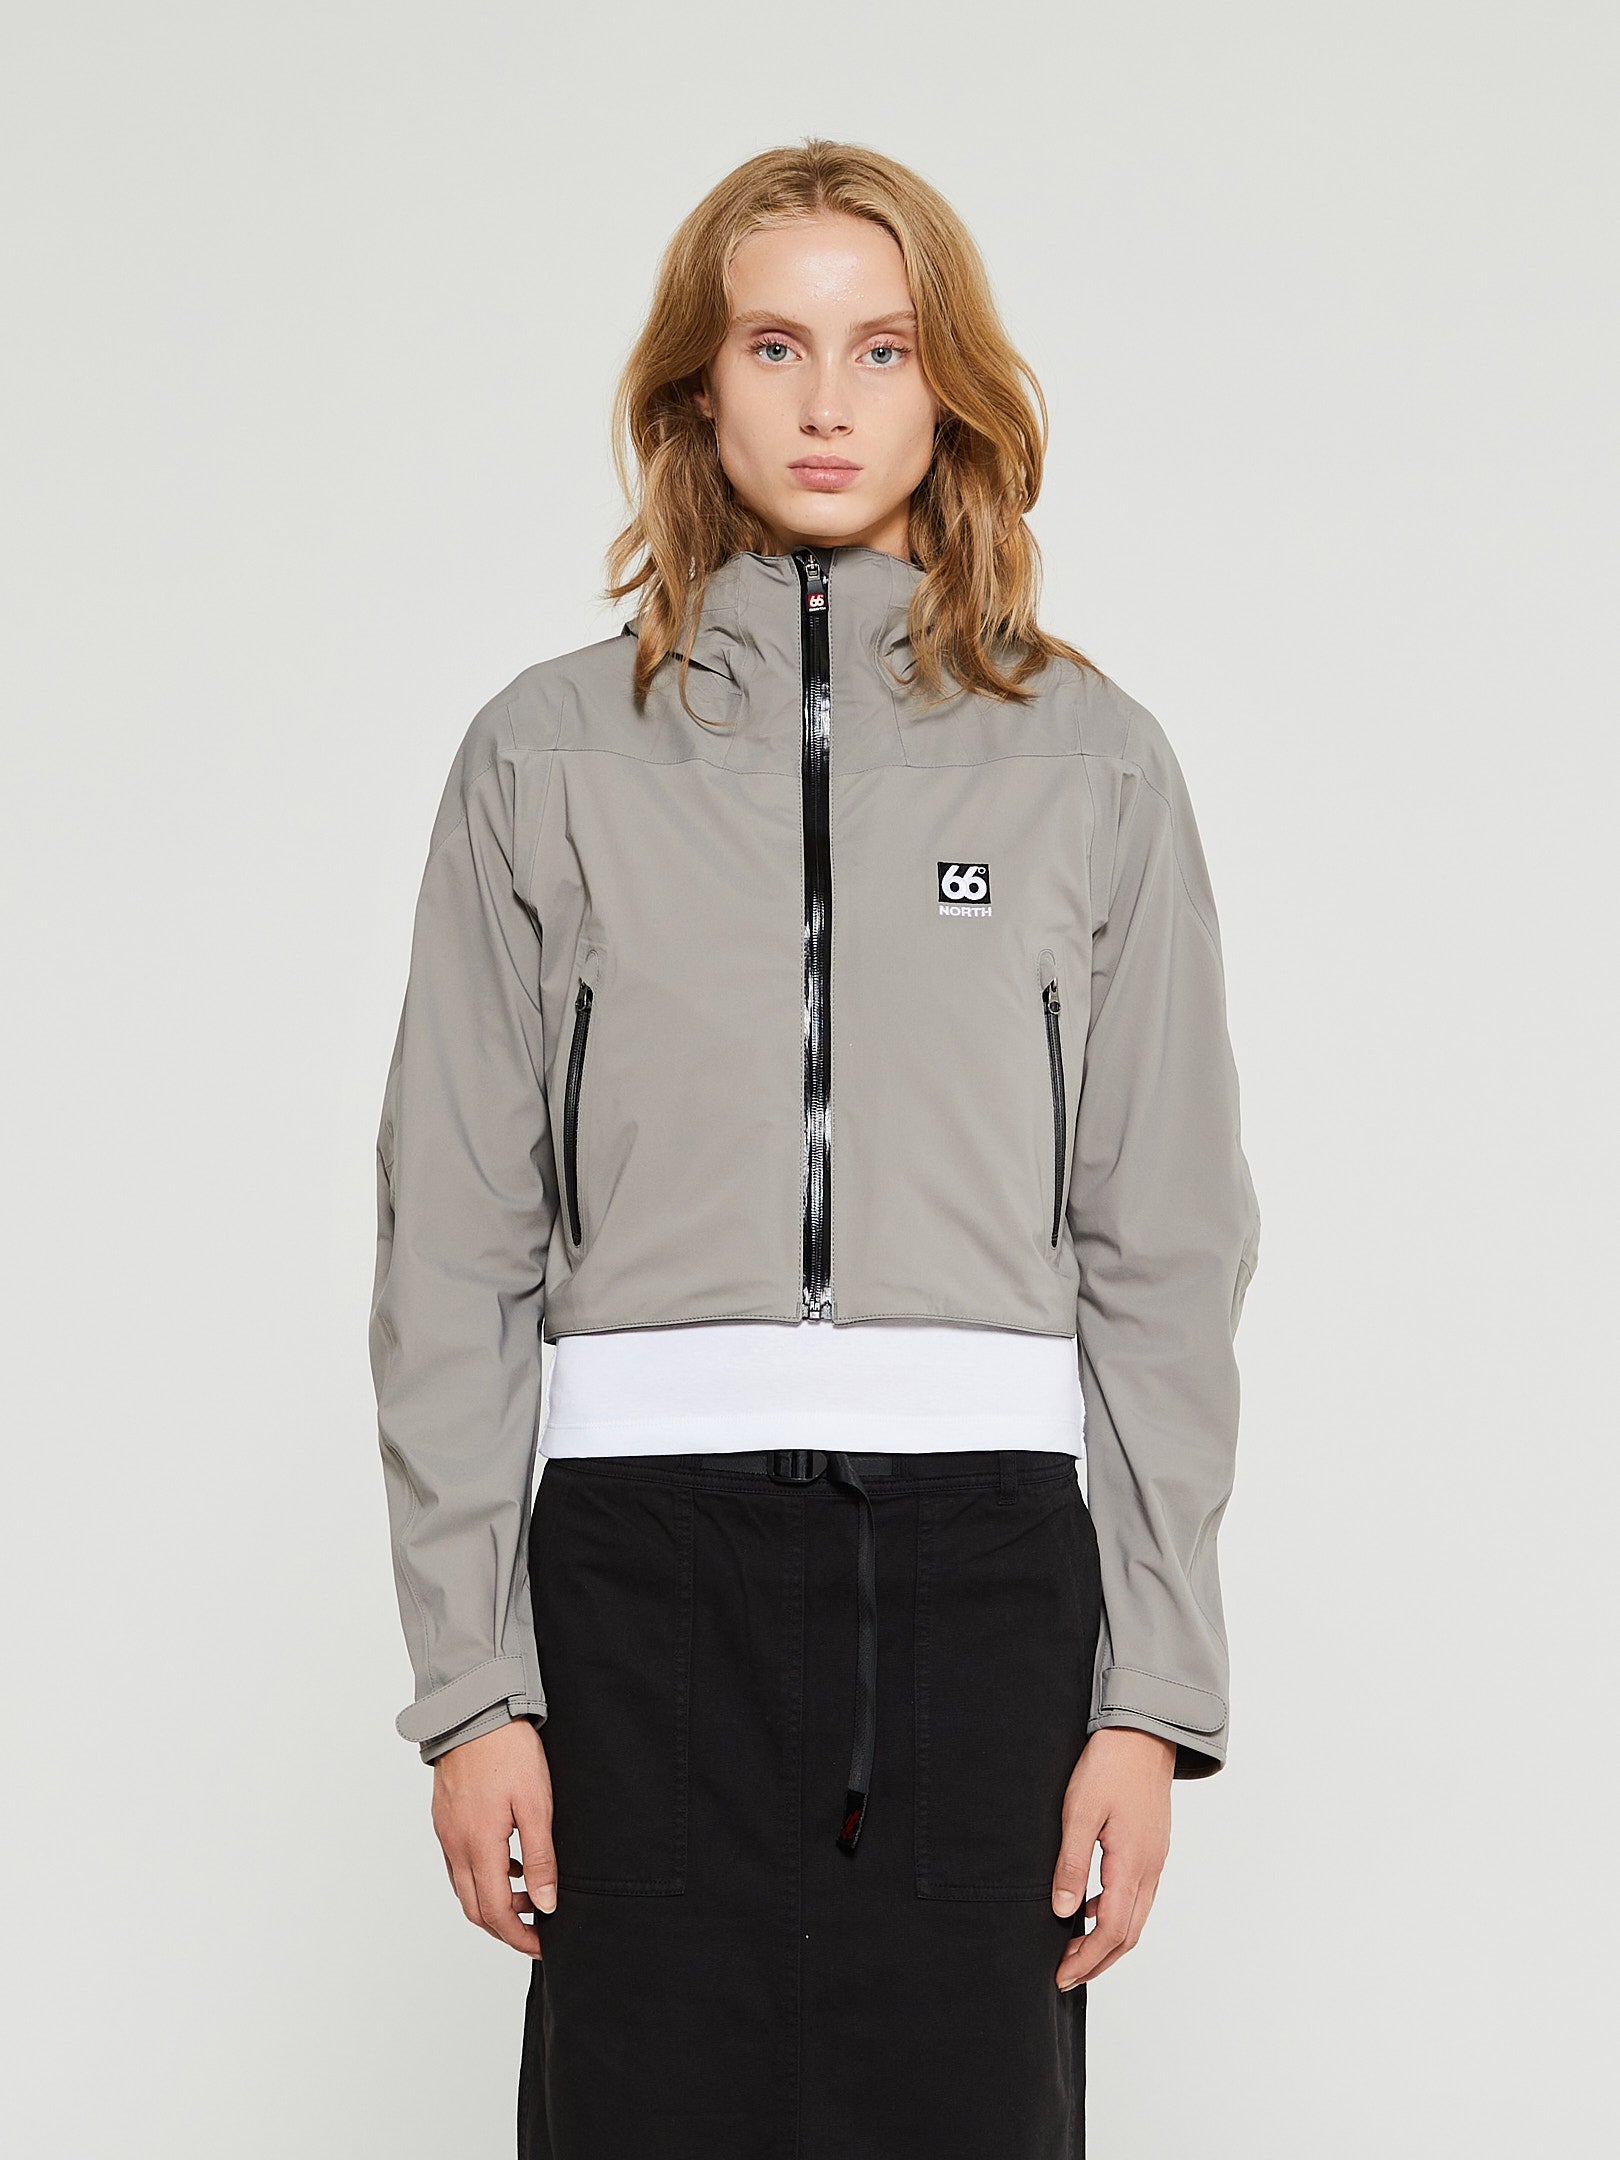 66 NORTH - Snaefell W Cropped Neoshell Jacket in Solid Grey